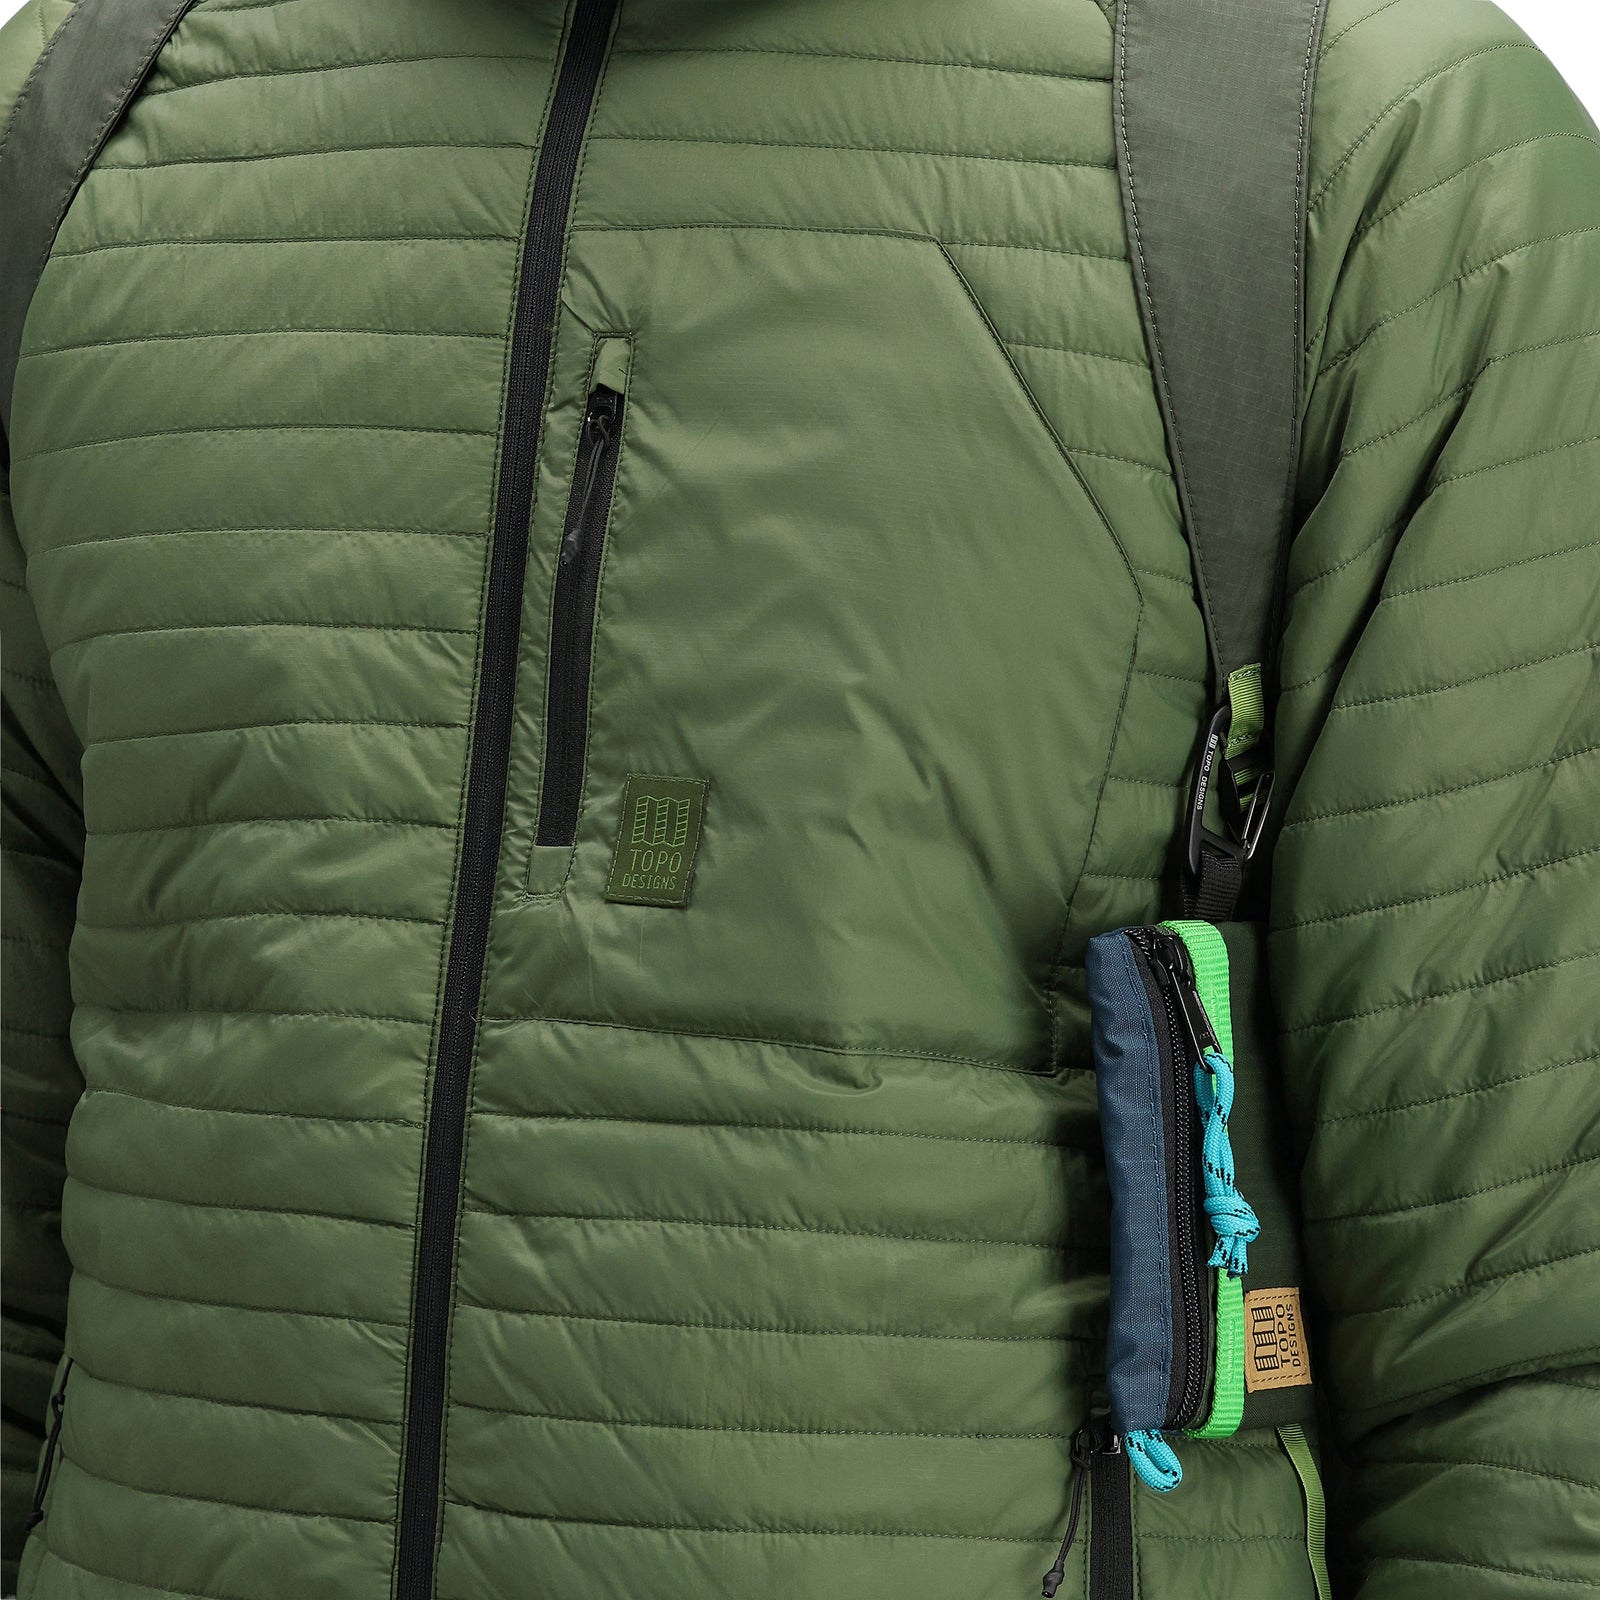 General detail shot of chest pocket and logo patch on model wearing Topo Designs Men's Global Puffer packable recycled insulated Hoodie jacket in "olive" green.